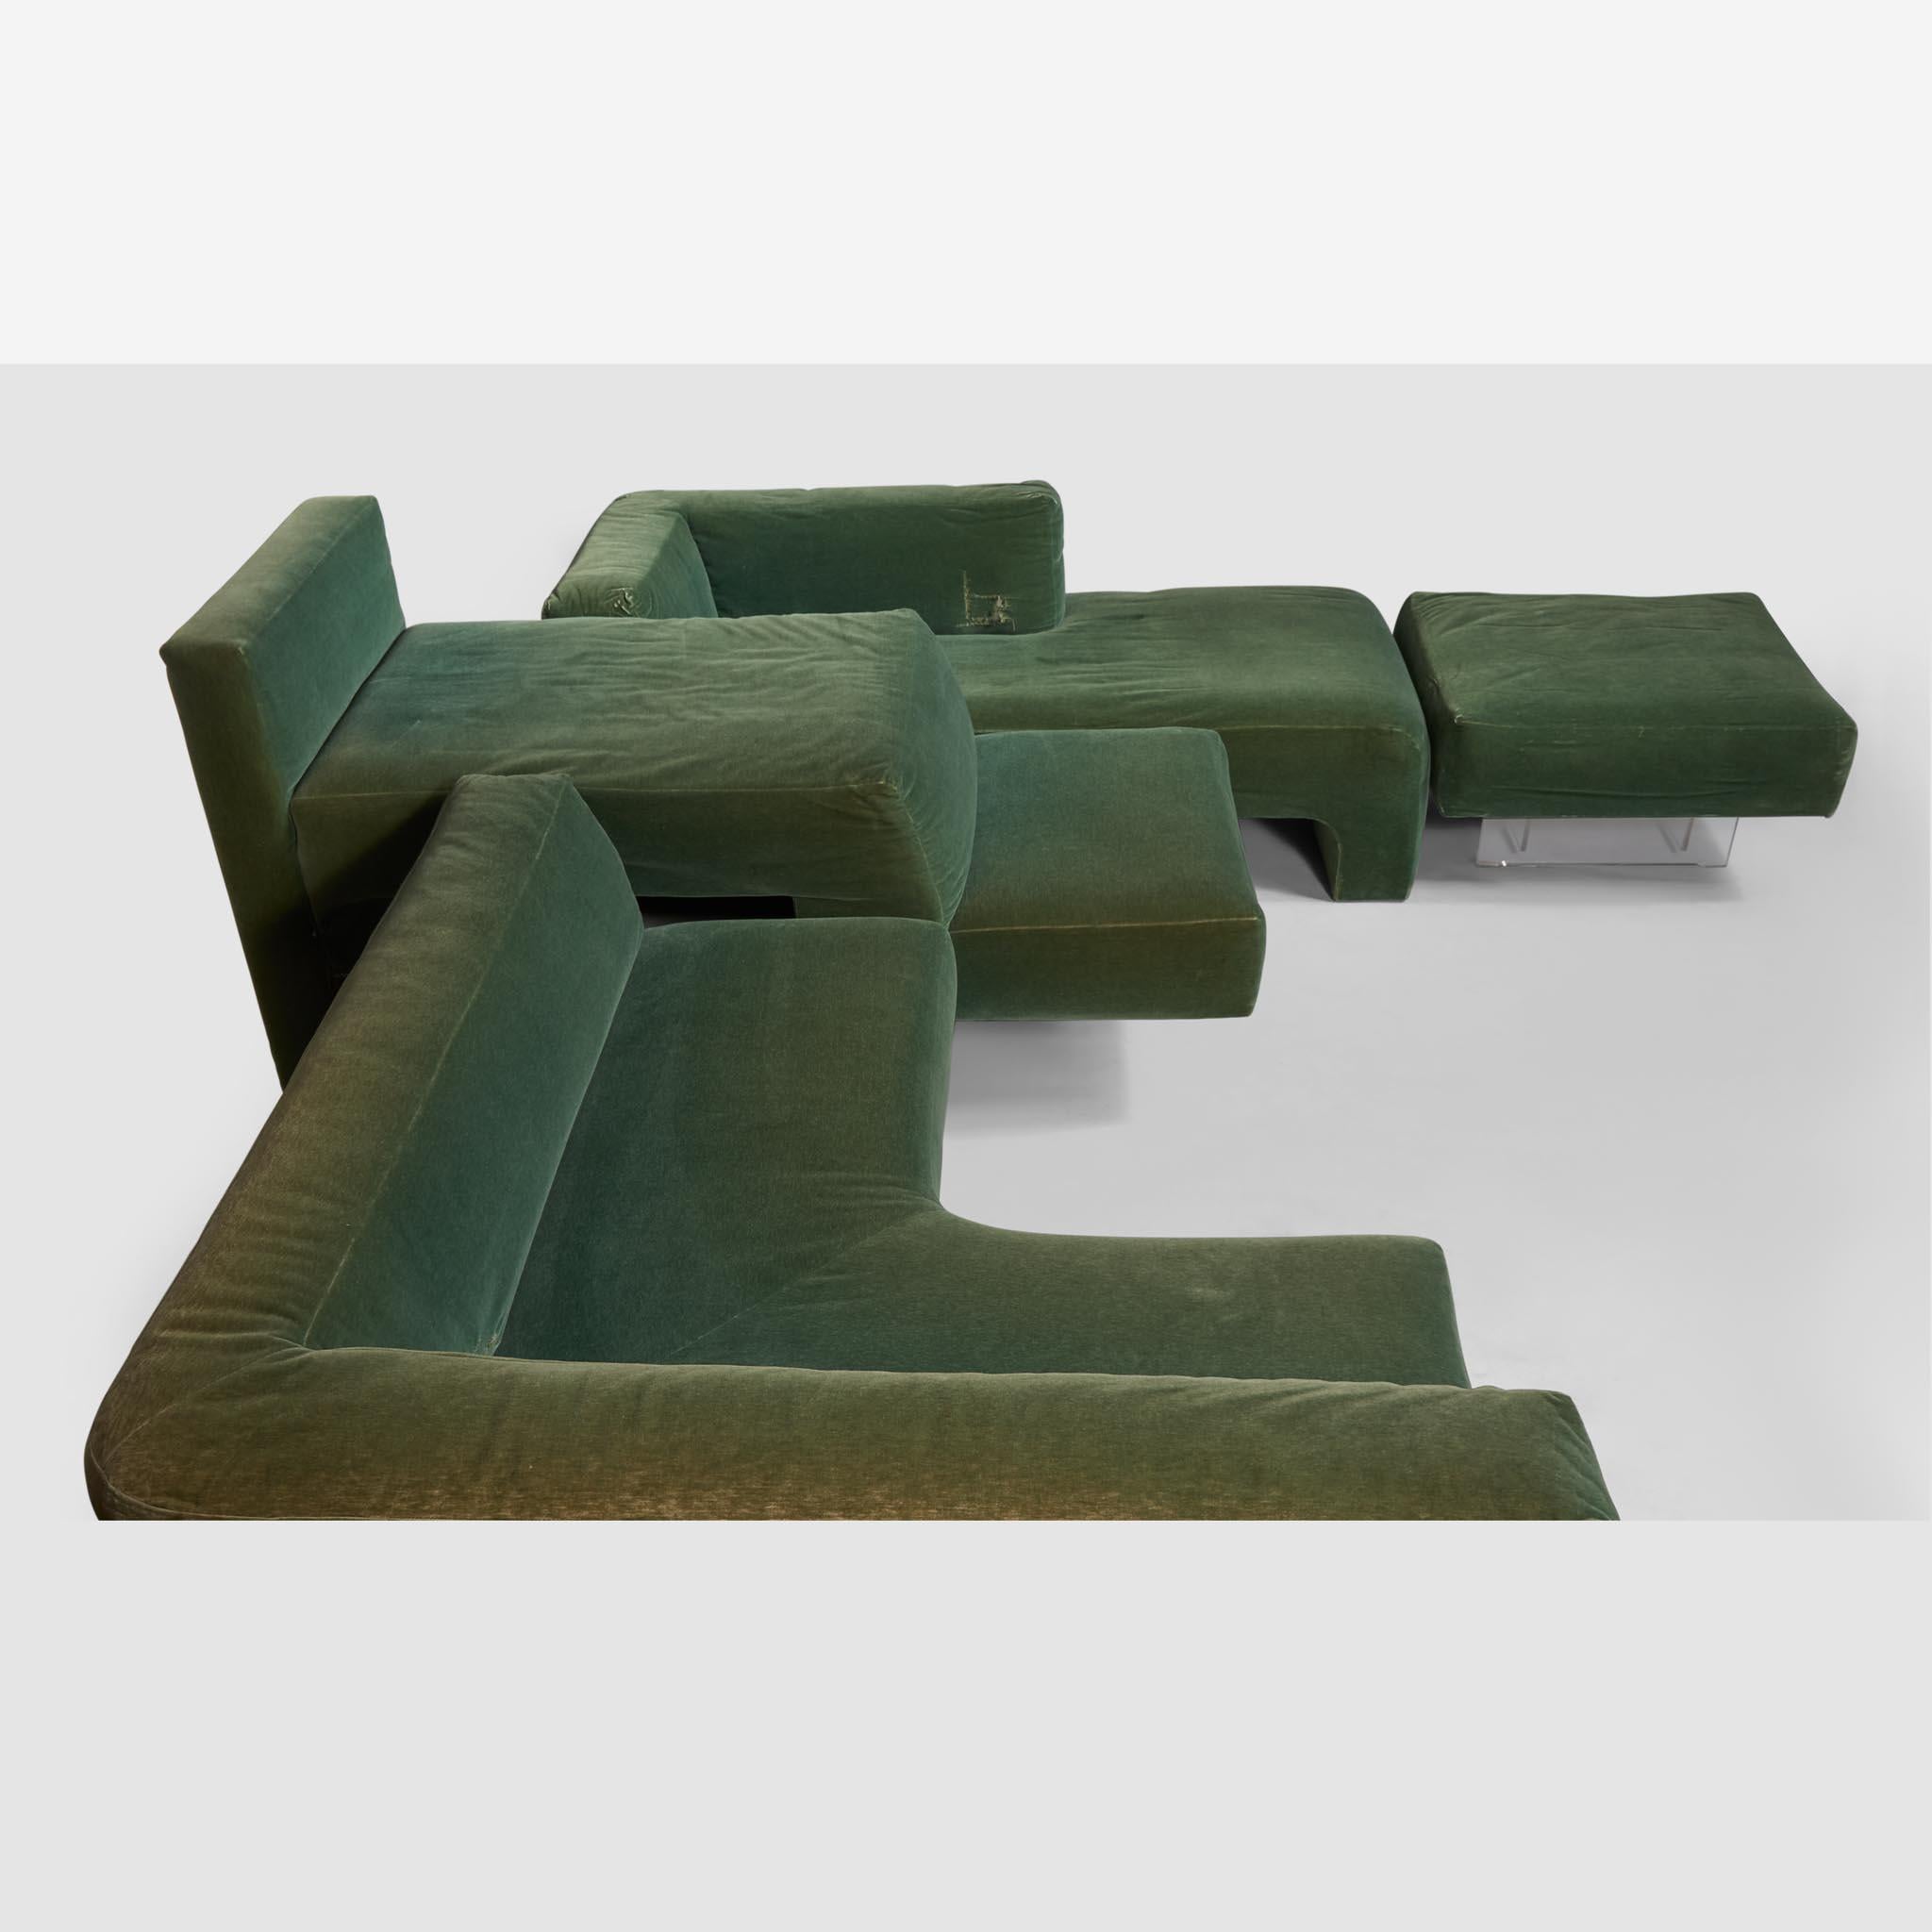 This may be the first Omnibus seating installation ever created by Kagan and was installed in the living room of Vladimir Kagan and Erica Wilson's Park Avenue apartment. With original green velvet upholstery and acrylic legs. In four sections,